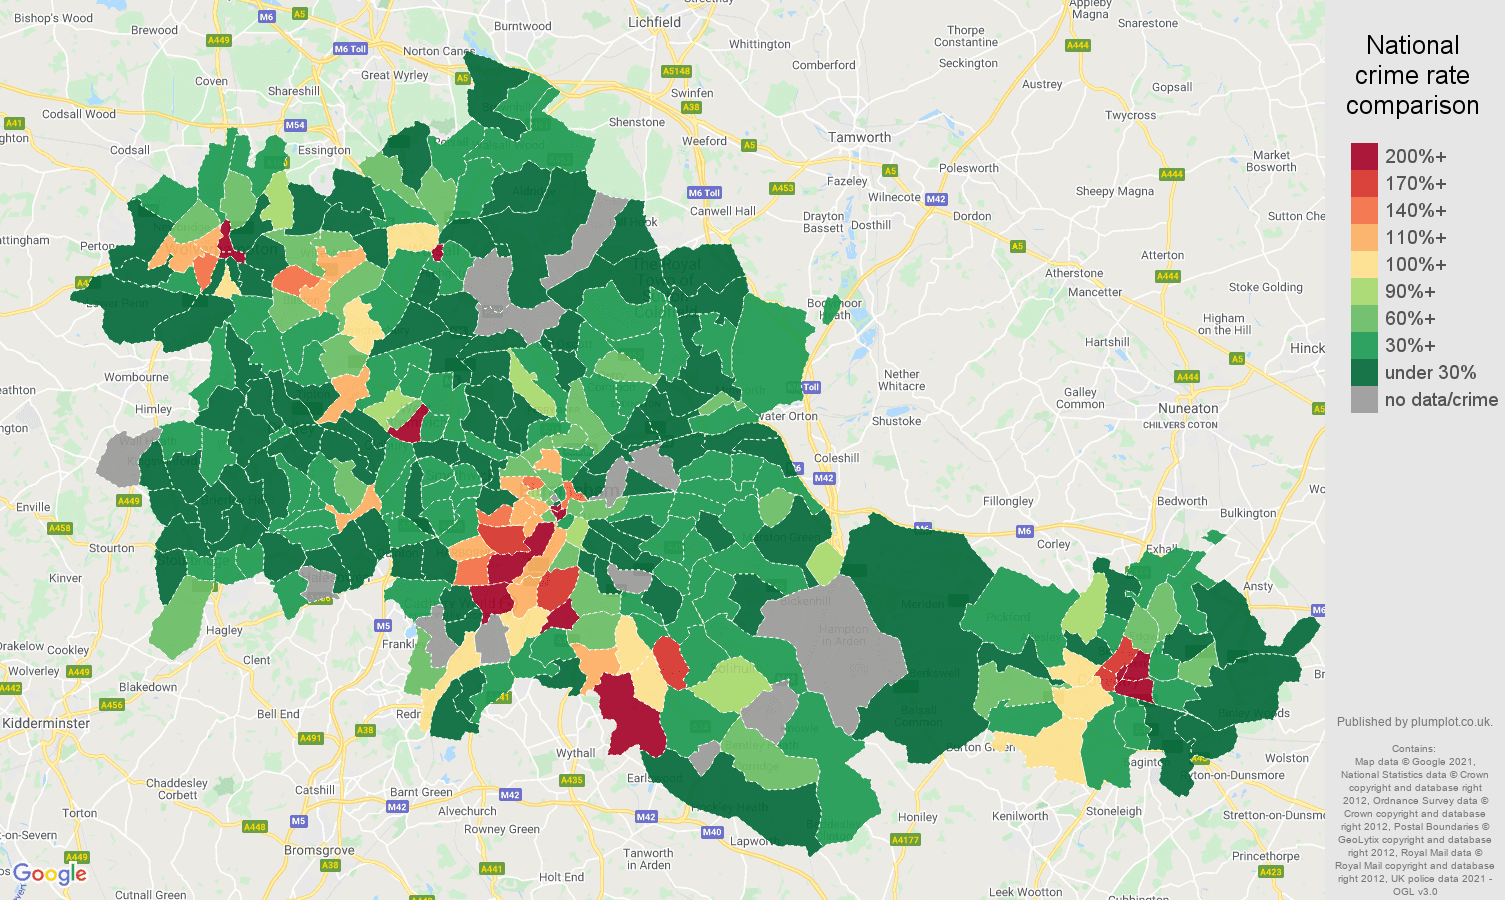 West Midlands county bicycle theft crime rate comparison map